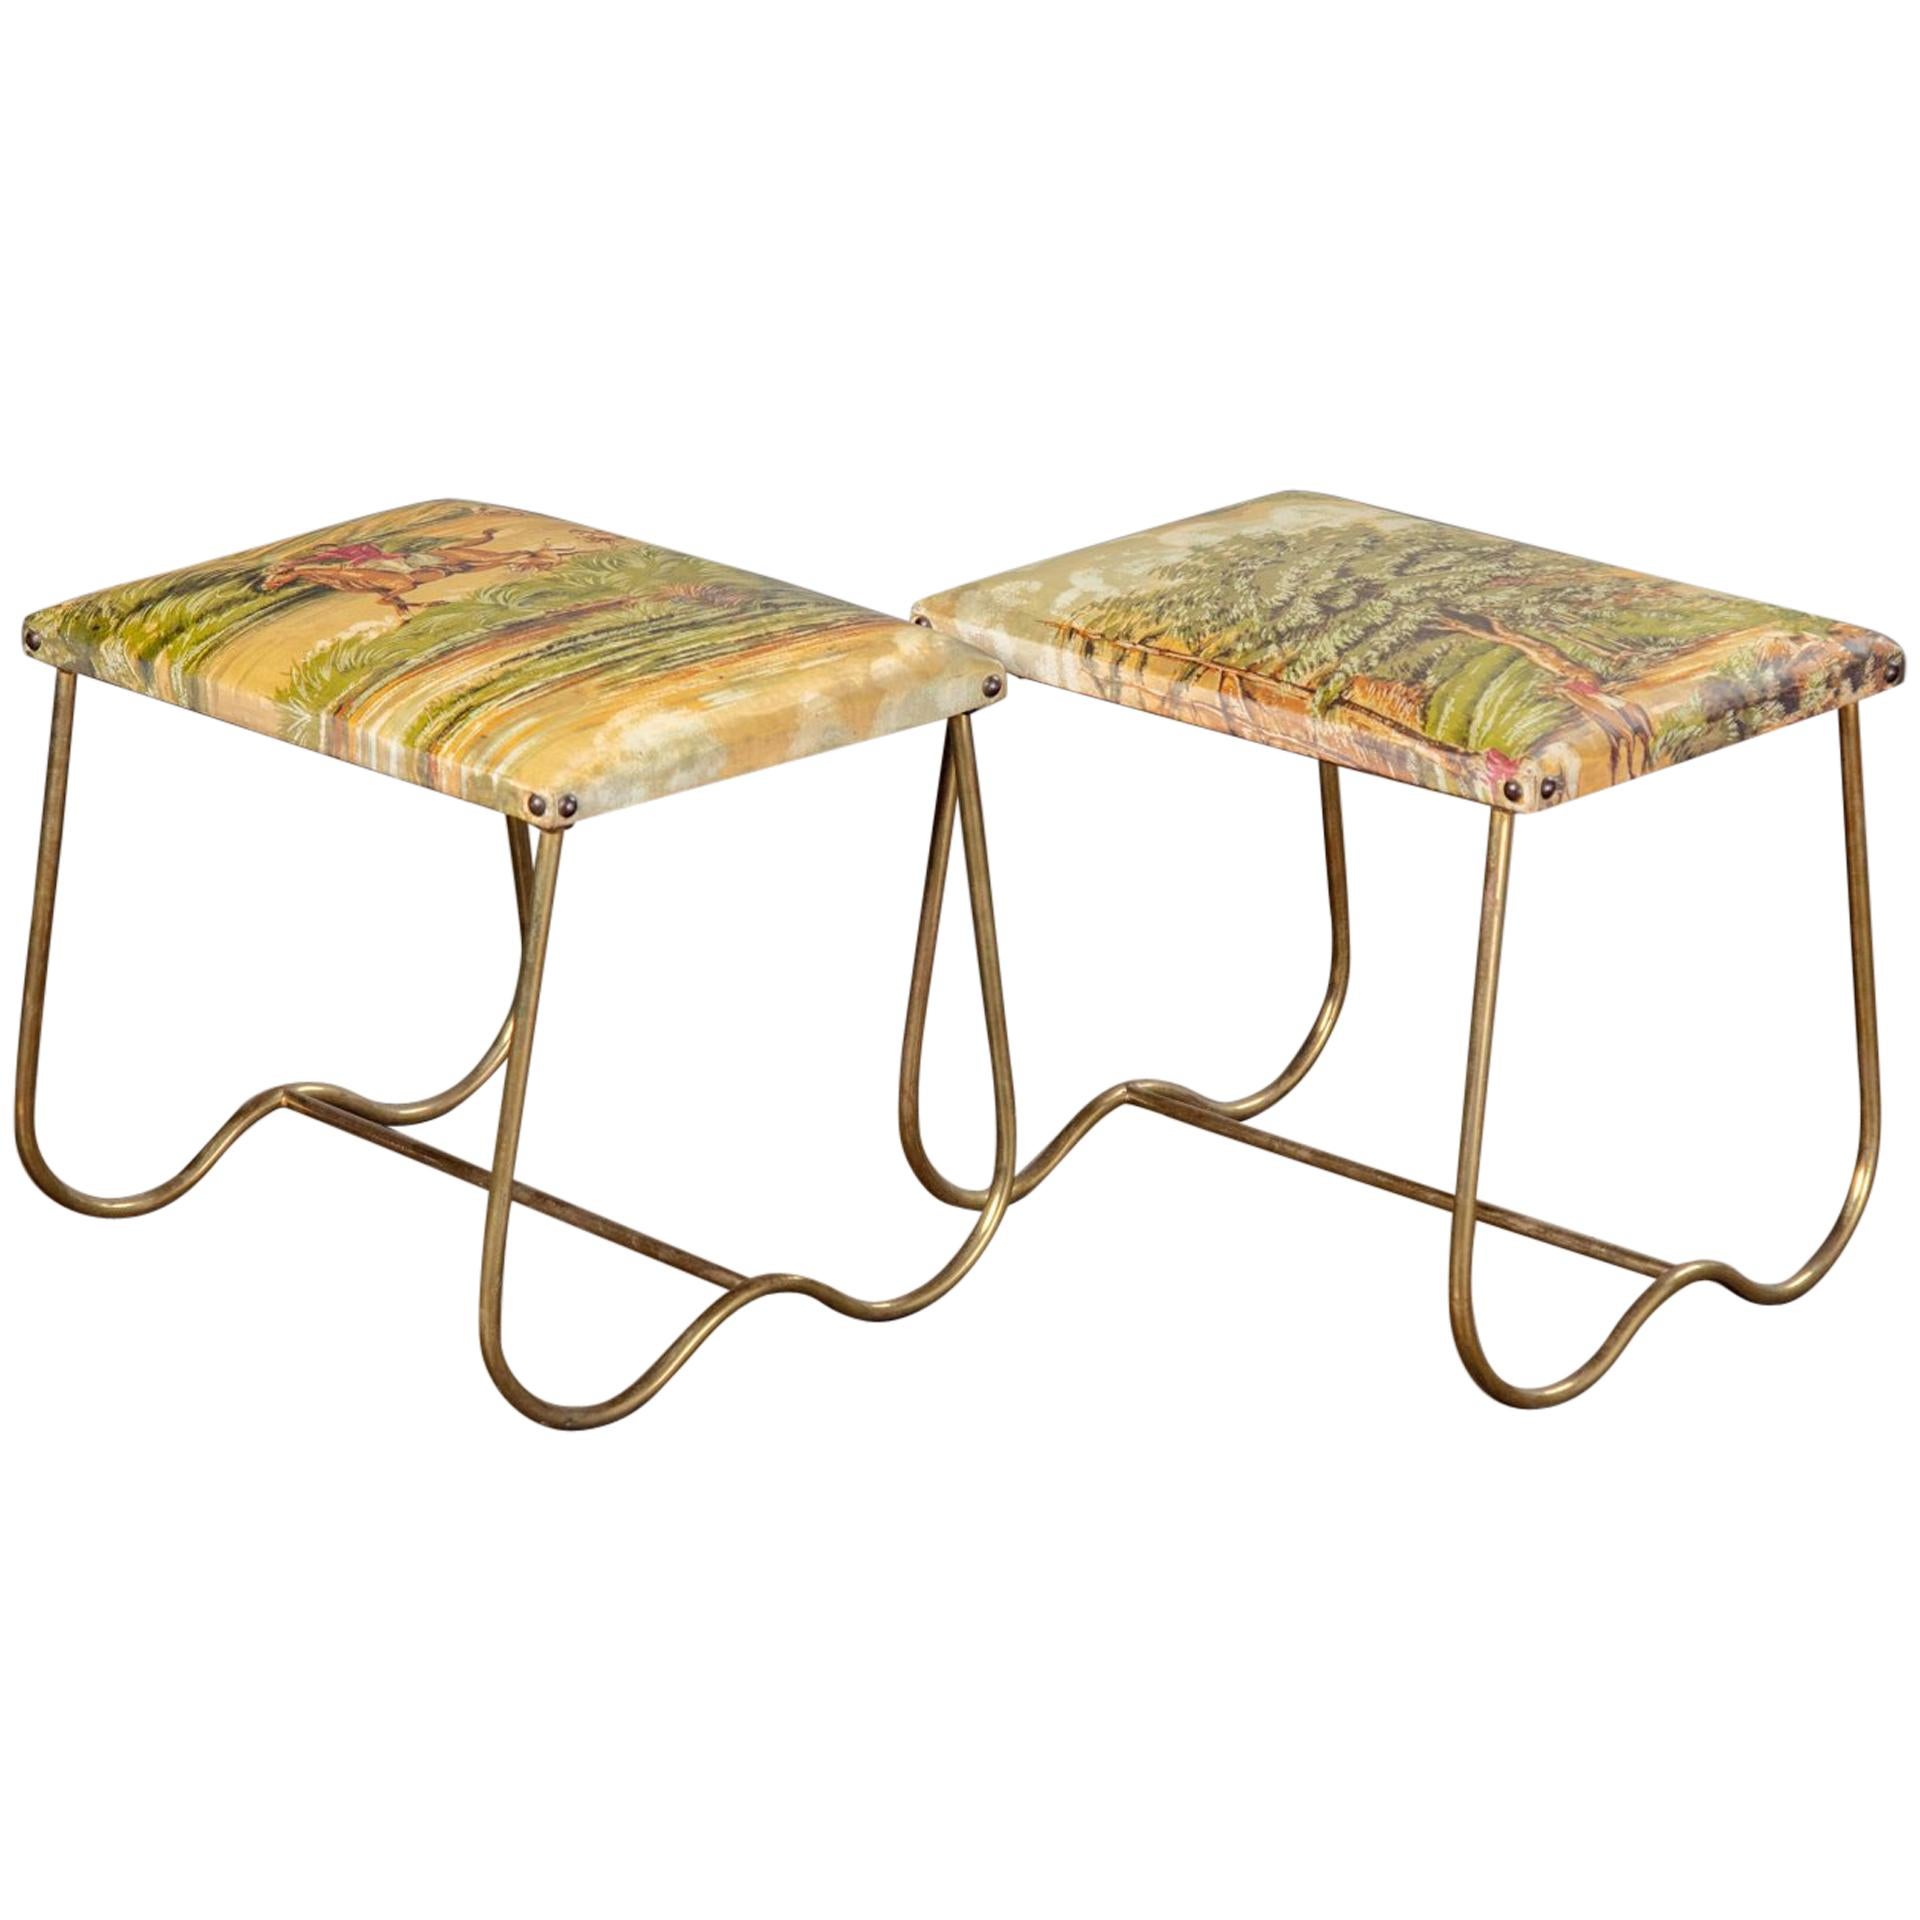 Pair of Midcentury Italian Brass Benches with Equestrian Themed Upholstery